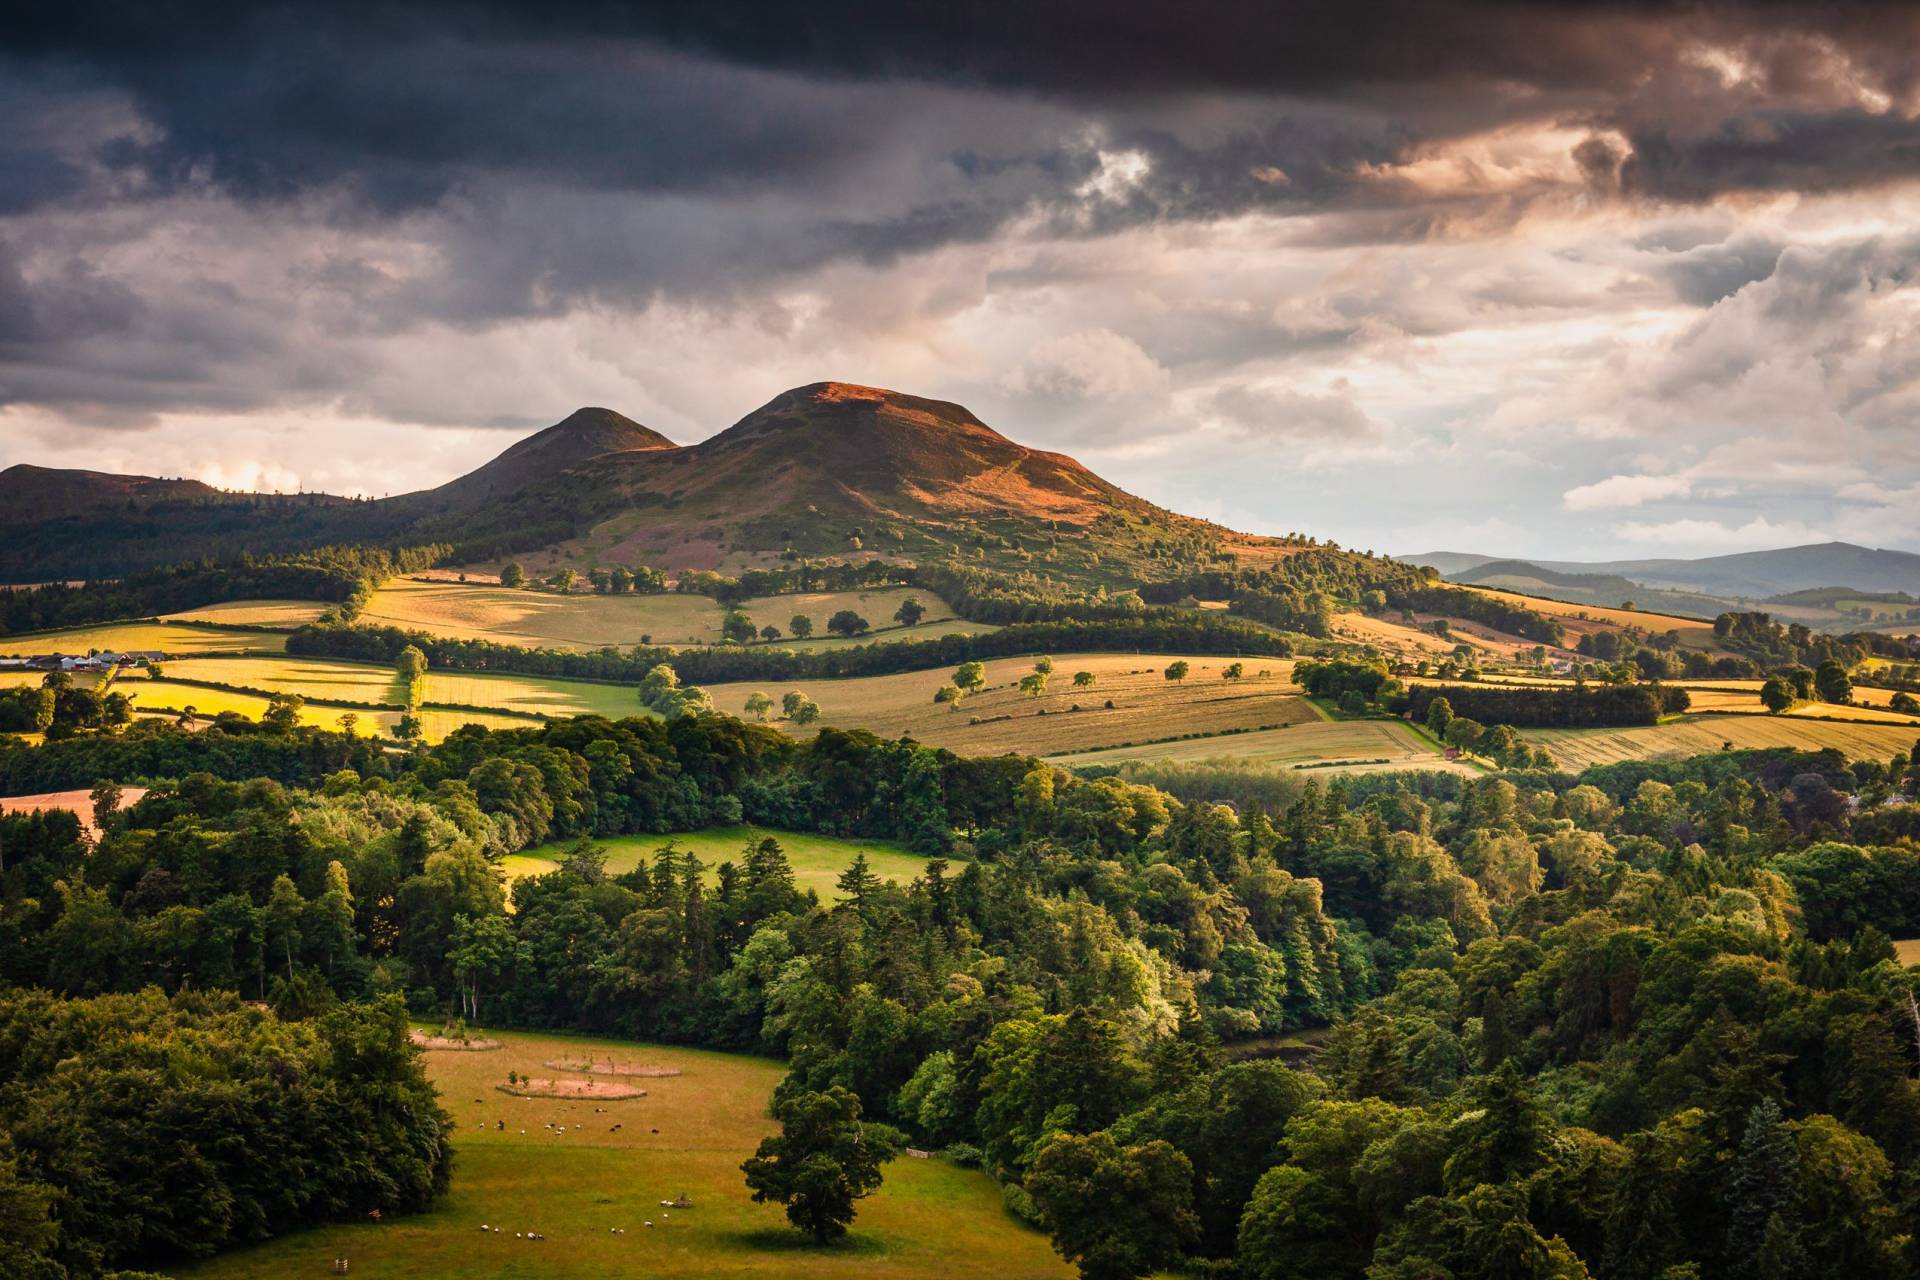 The Eildon Hills from Scott's View, The Borders, Scotland. BD002